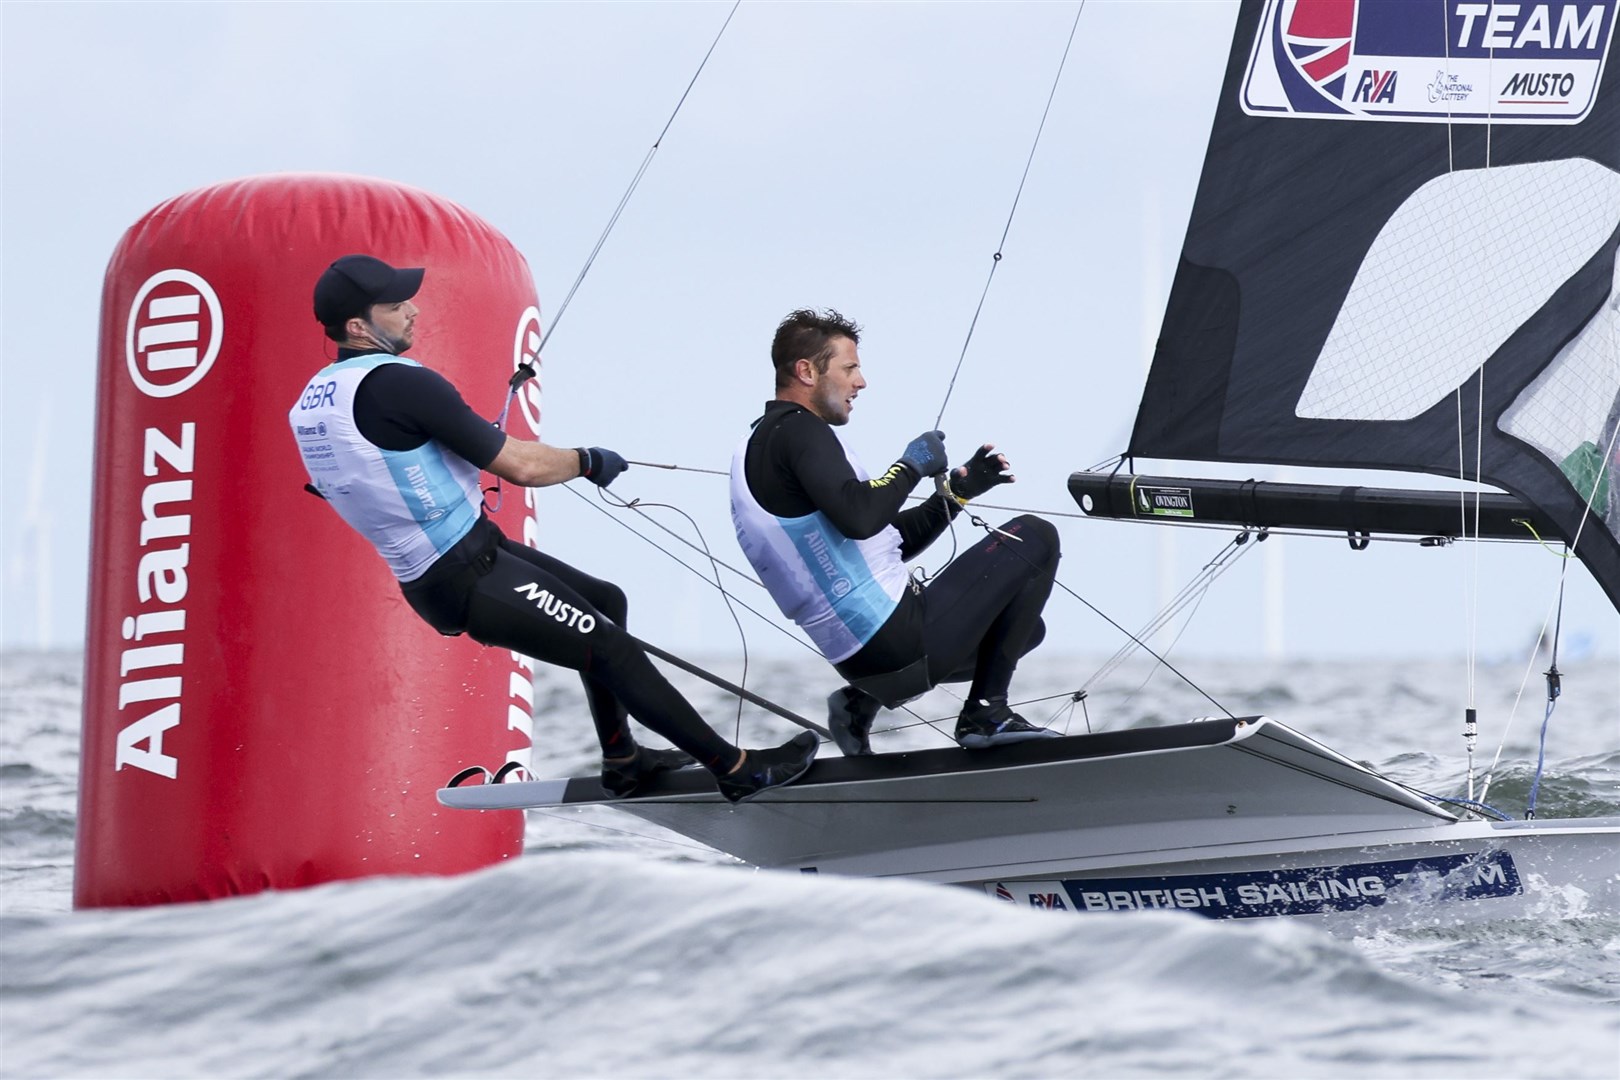 Fynn Sterritt (right) and sailing partner James Peters in action at the world championships.